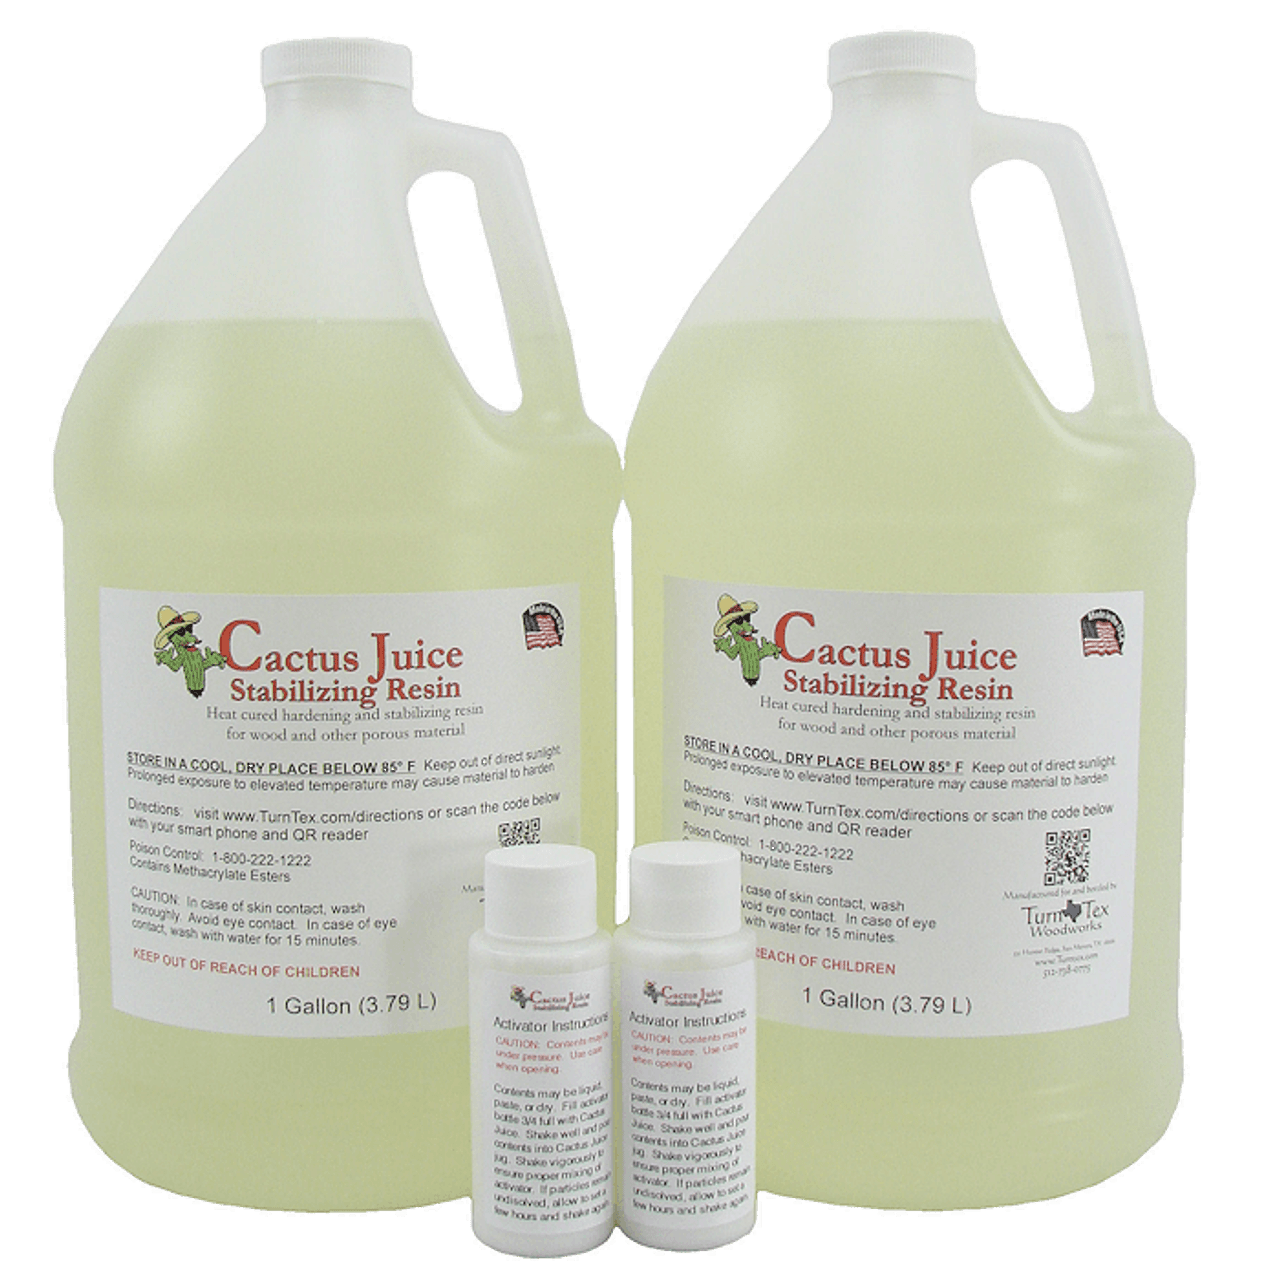 Brisa Ltd - Cactus juice stabilizing resin, one of the most used resins in  the world. Available in a quart, halfgallon and gallon jugs. #brisaltd  #stabilizedwood #stabilized #stabilizedburl #stabilizing #cactusjuice #resin  #madeinusa #